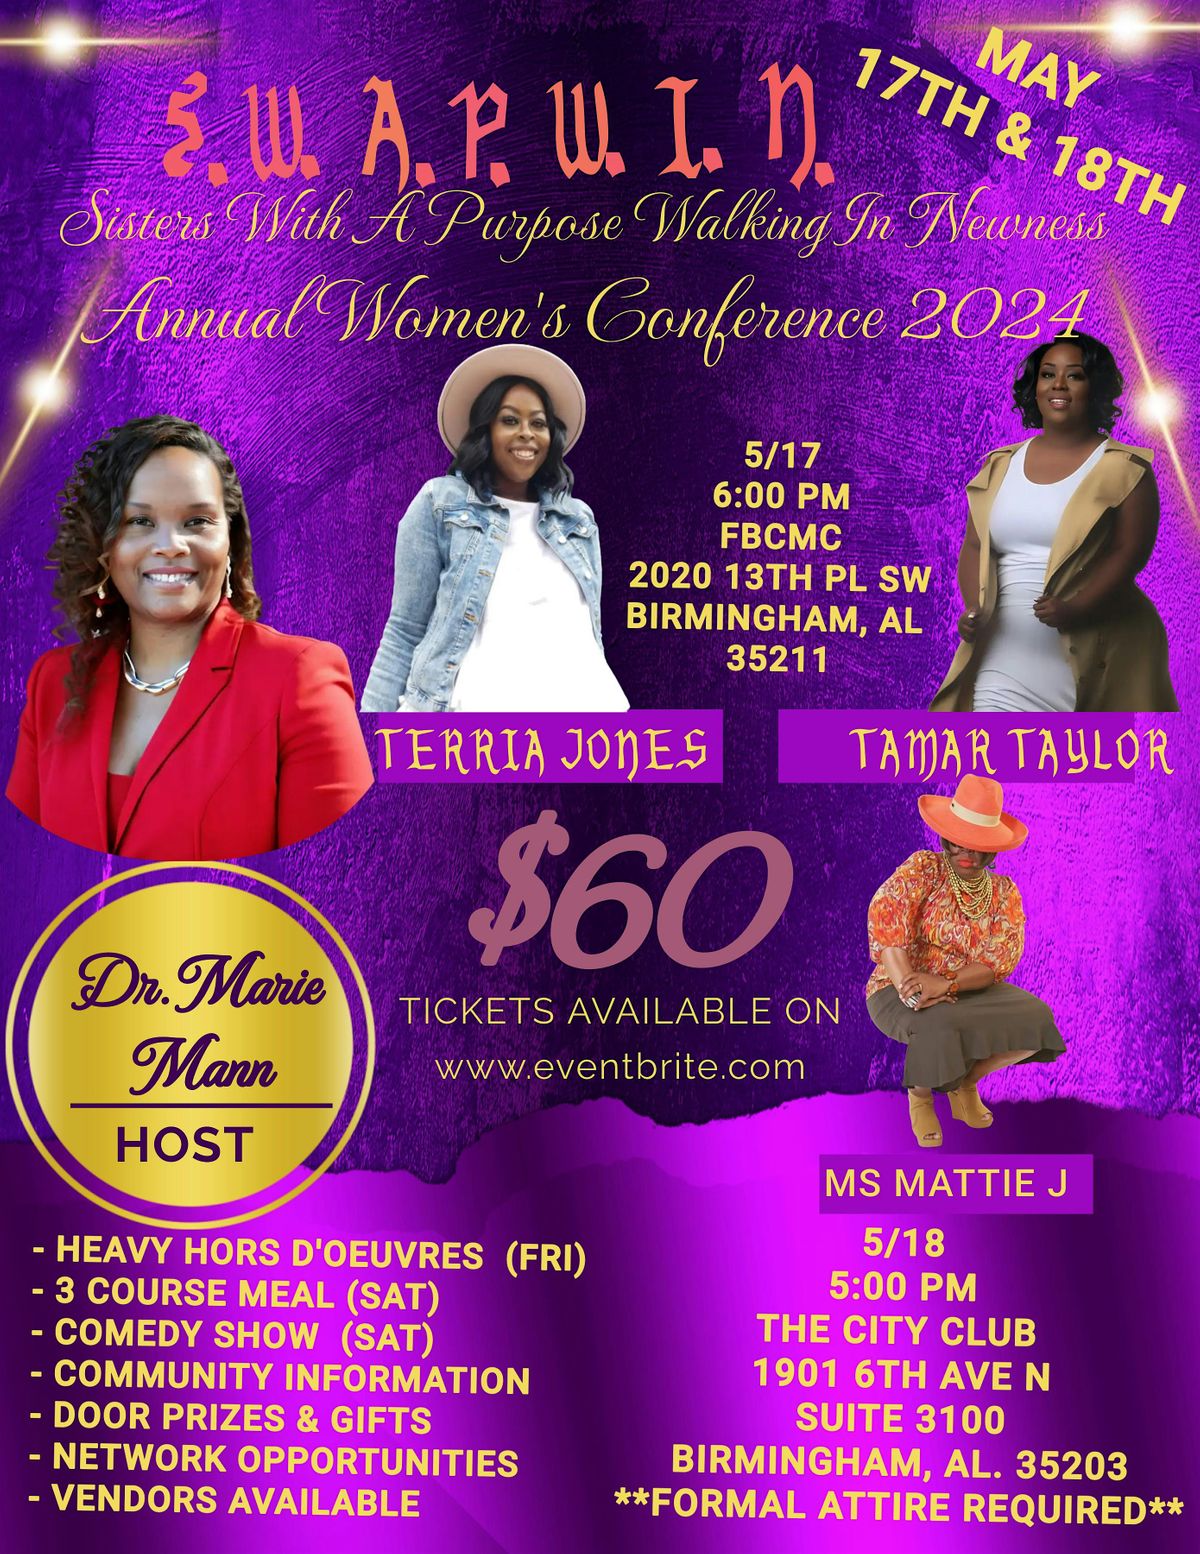 S.W.A.P.W.I.N. ANNUAL WOMEN'S CONFERENCE 2024